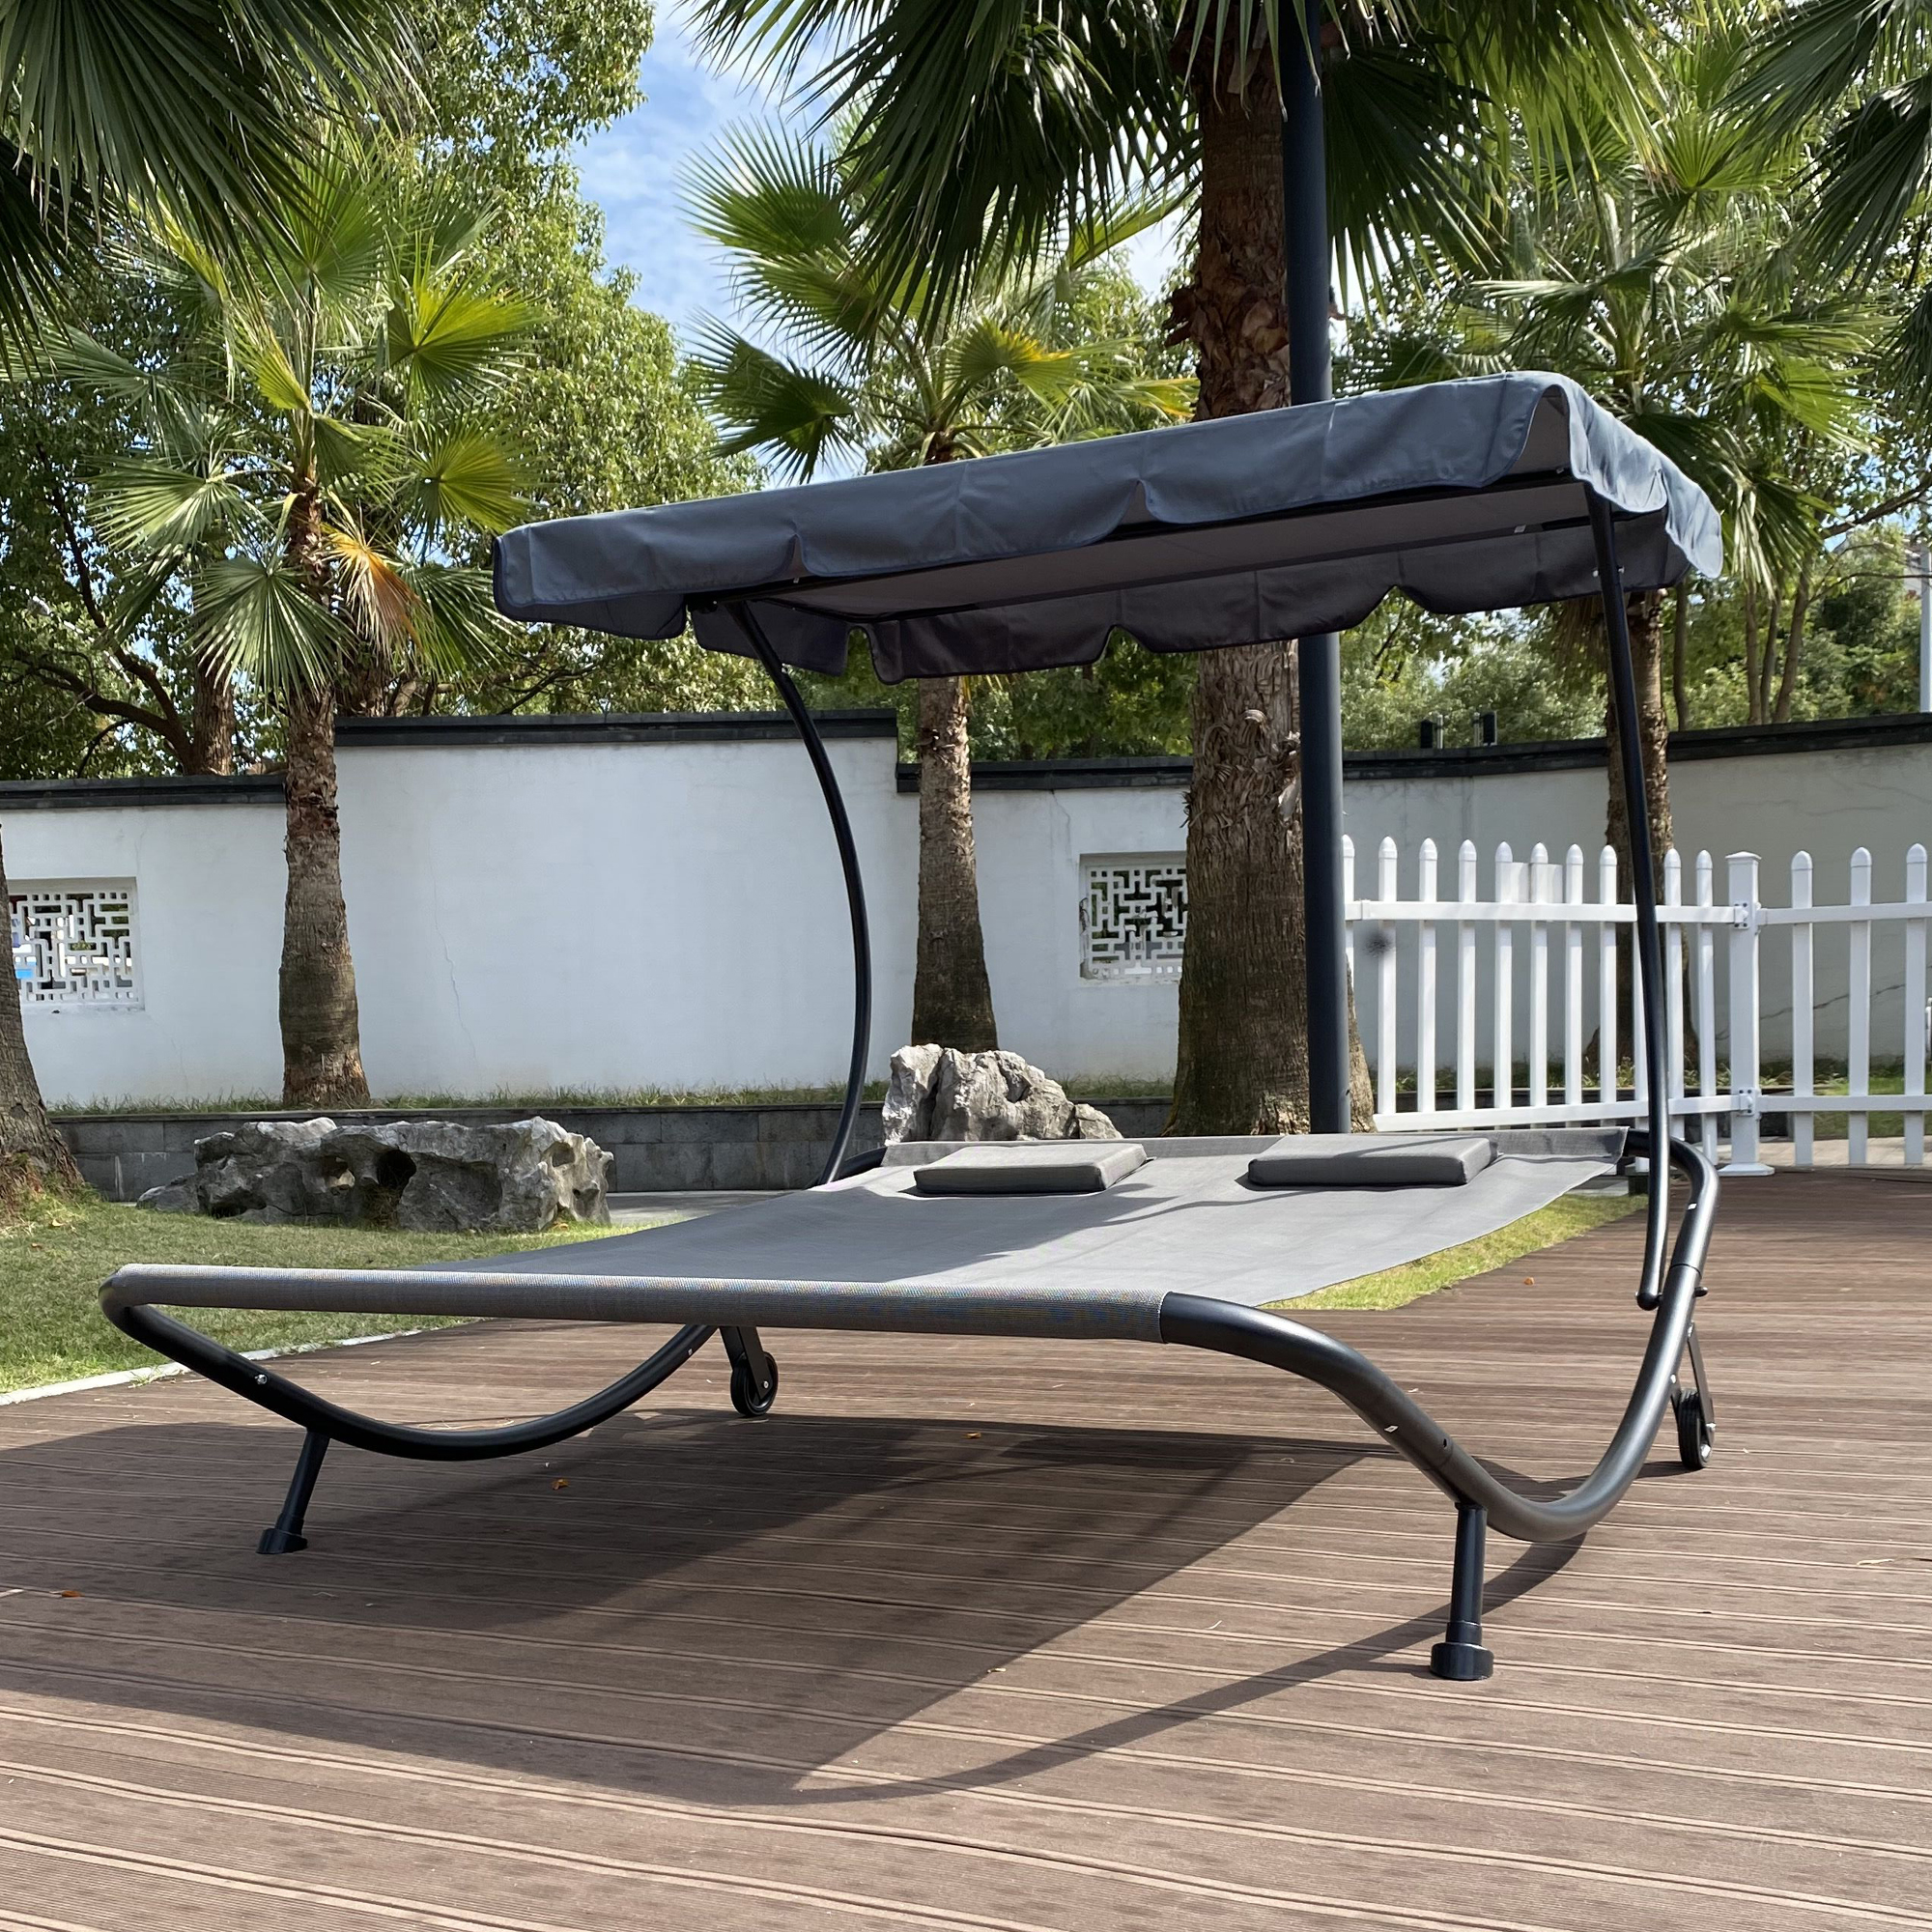 Outdoor Portable Double Chaise Lounge Bed with Adjustable Canopy Pillows for Sun Room Garden Courtyard Poolside Beach [US-Stock]